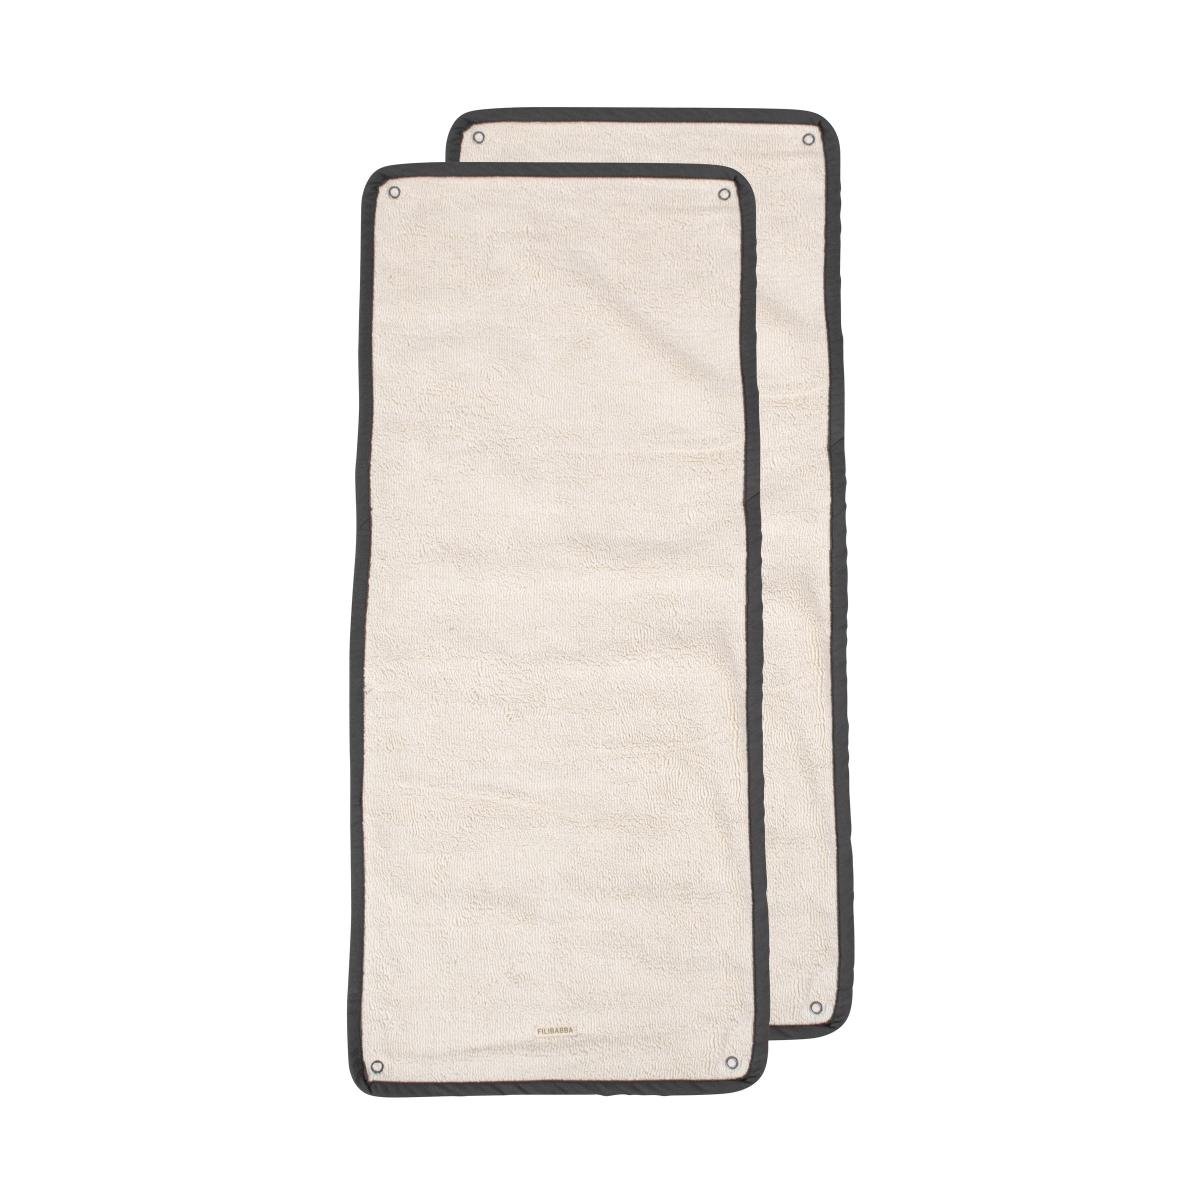 Filibabba - Middle layer 2-pack for Changing Pad - Stone grey